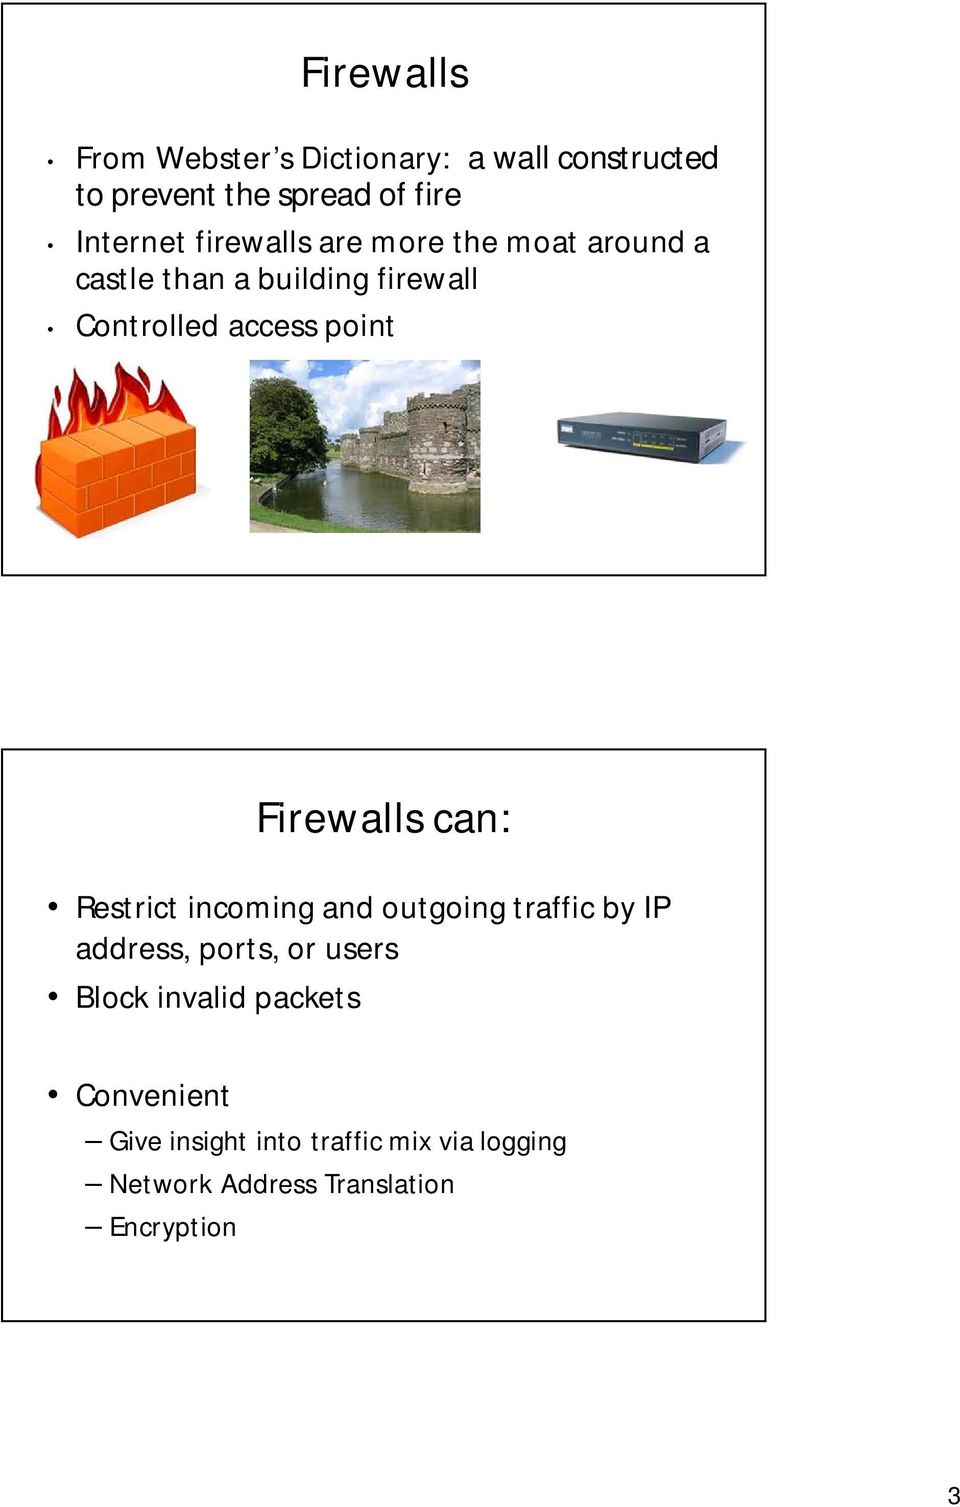 Firewalls can: Restrict incoming and outgoing traffic by IP address, ports, or users Block